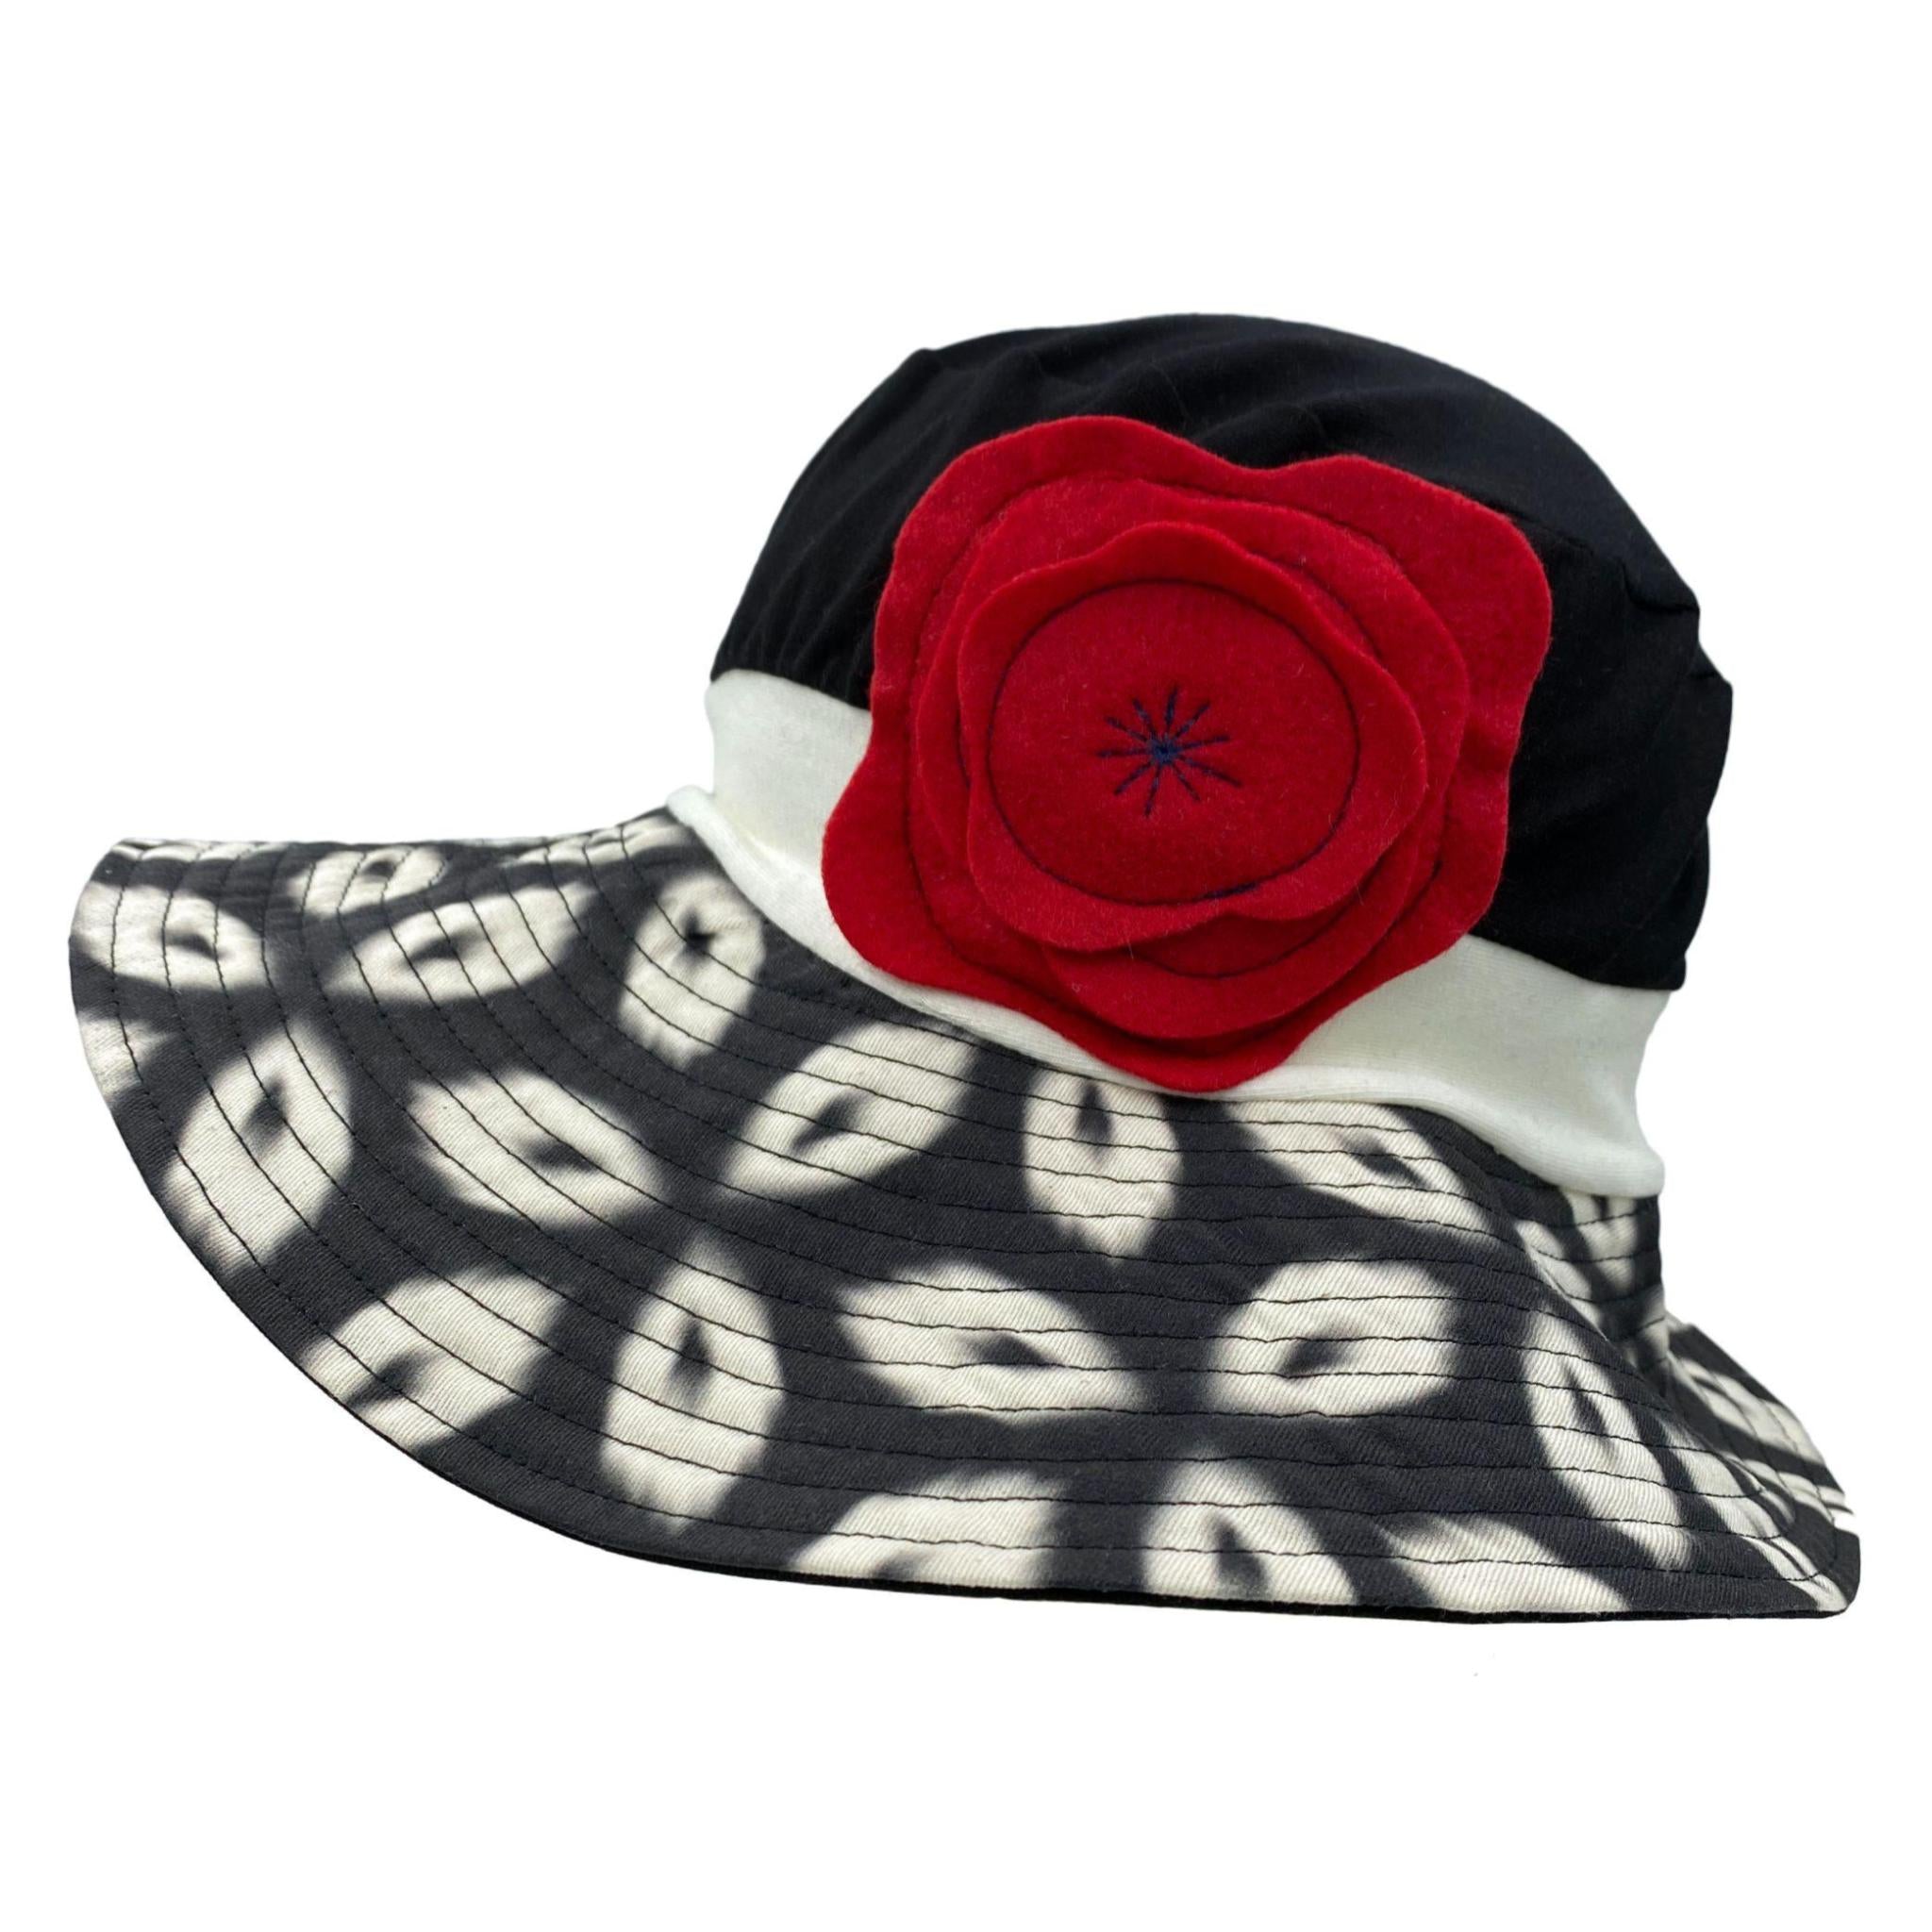 Reversible, Packable Cotton Sun Hat - Multi Floral One Size - Cancer & Chemotherapy Hats